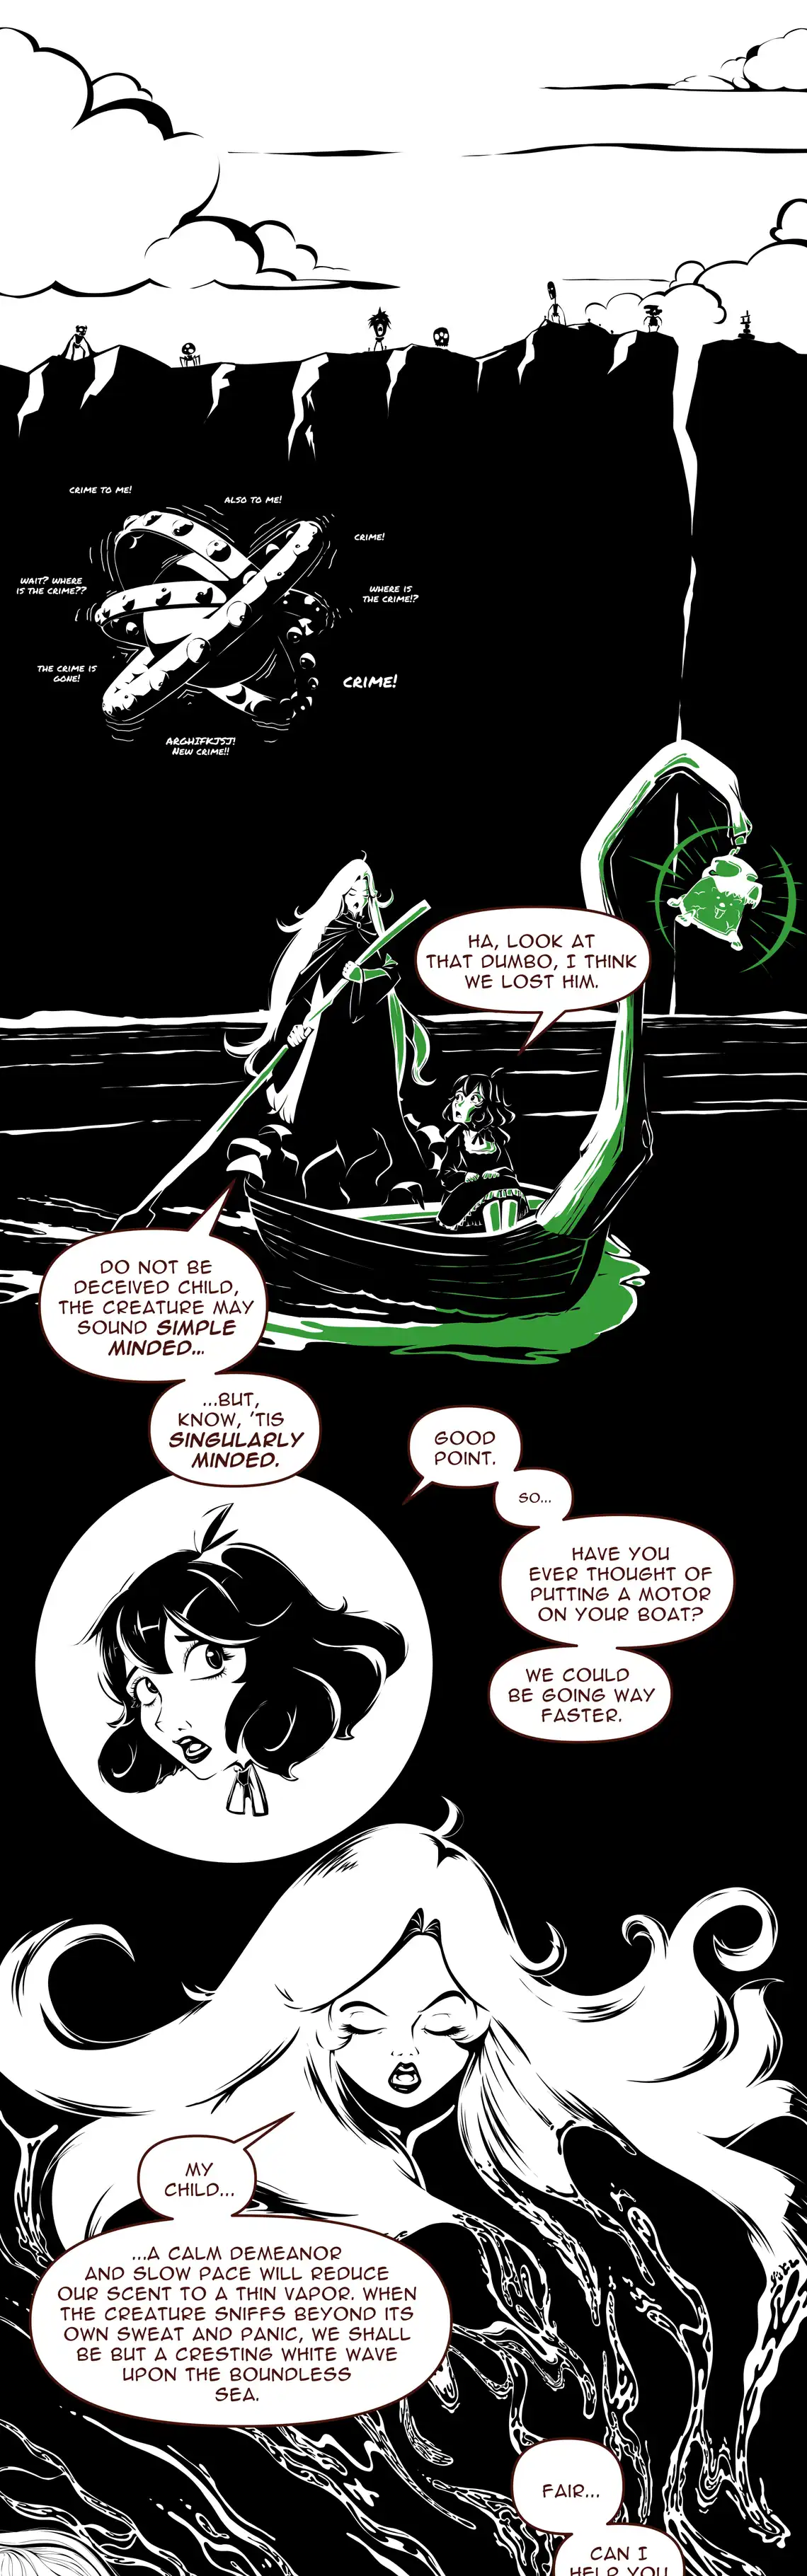 Kamiko and the Ferrywoman flee the shore of the Mortal Realm on a gondola. The comic is black and white and high contrast and depicts a stylized sea, where our characters discuss how to flee the ophanim.